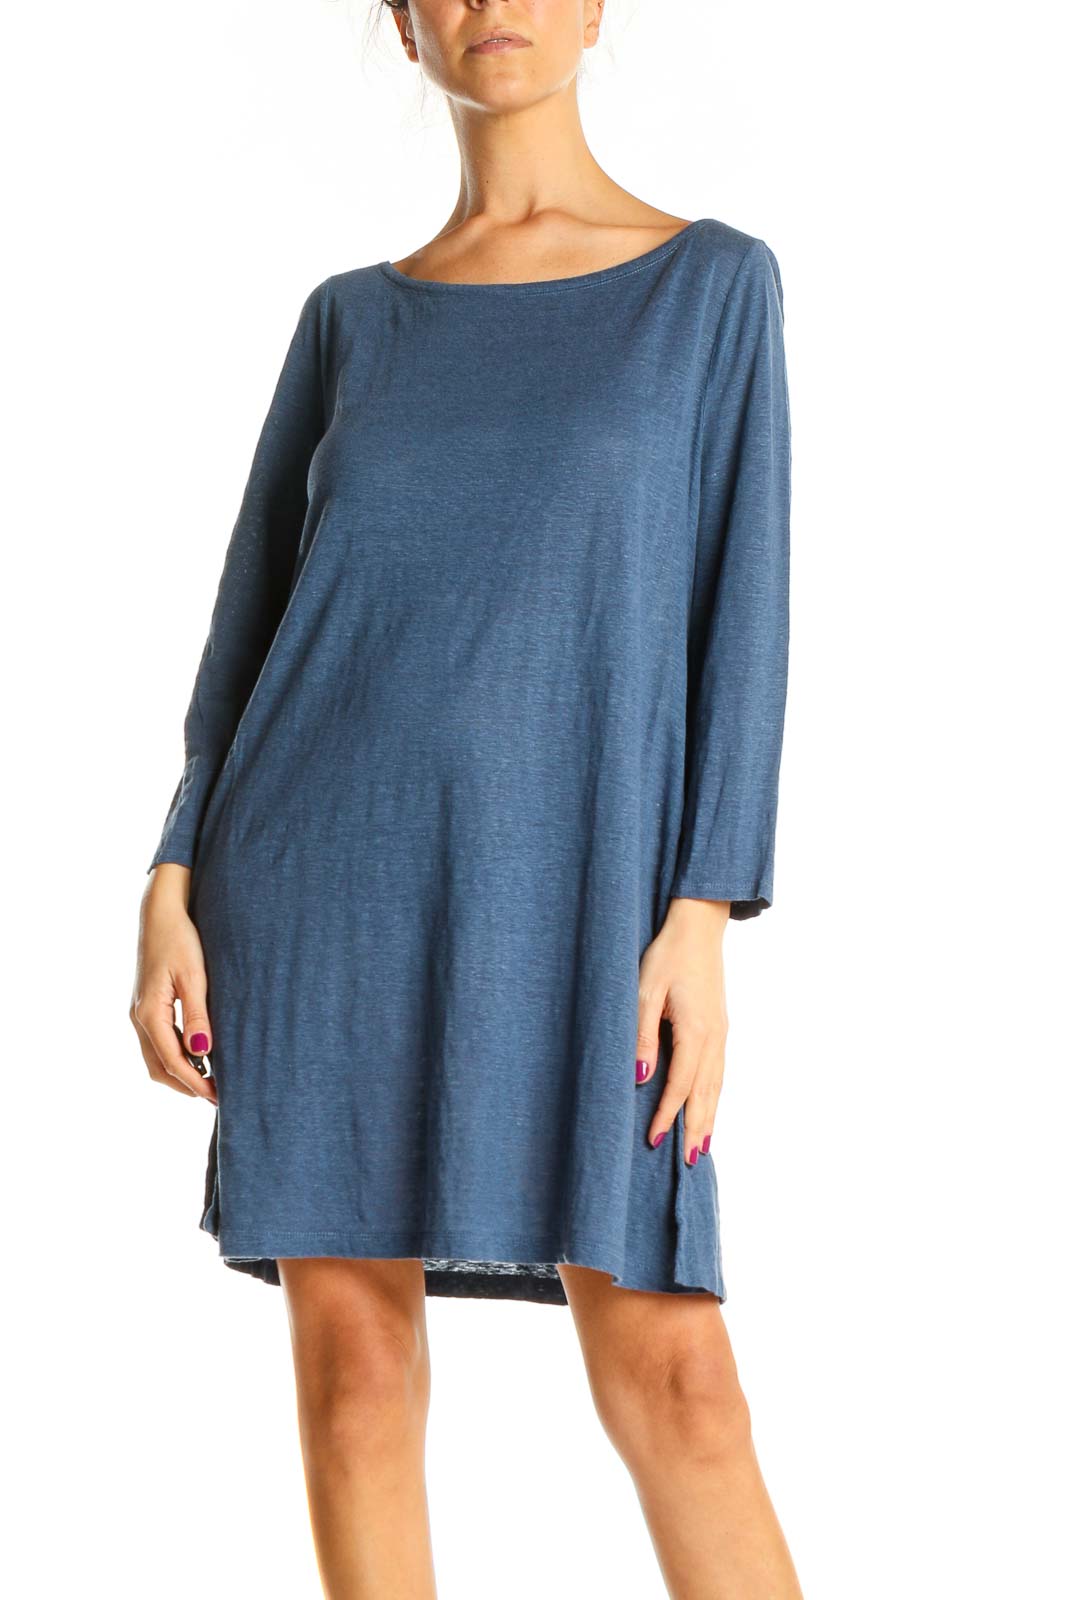 Blue Day Shift Dress Front